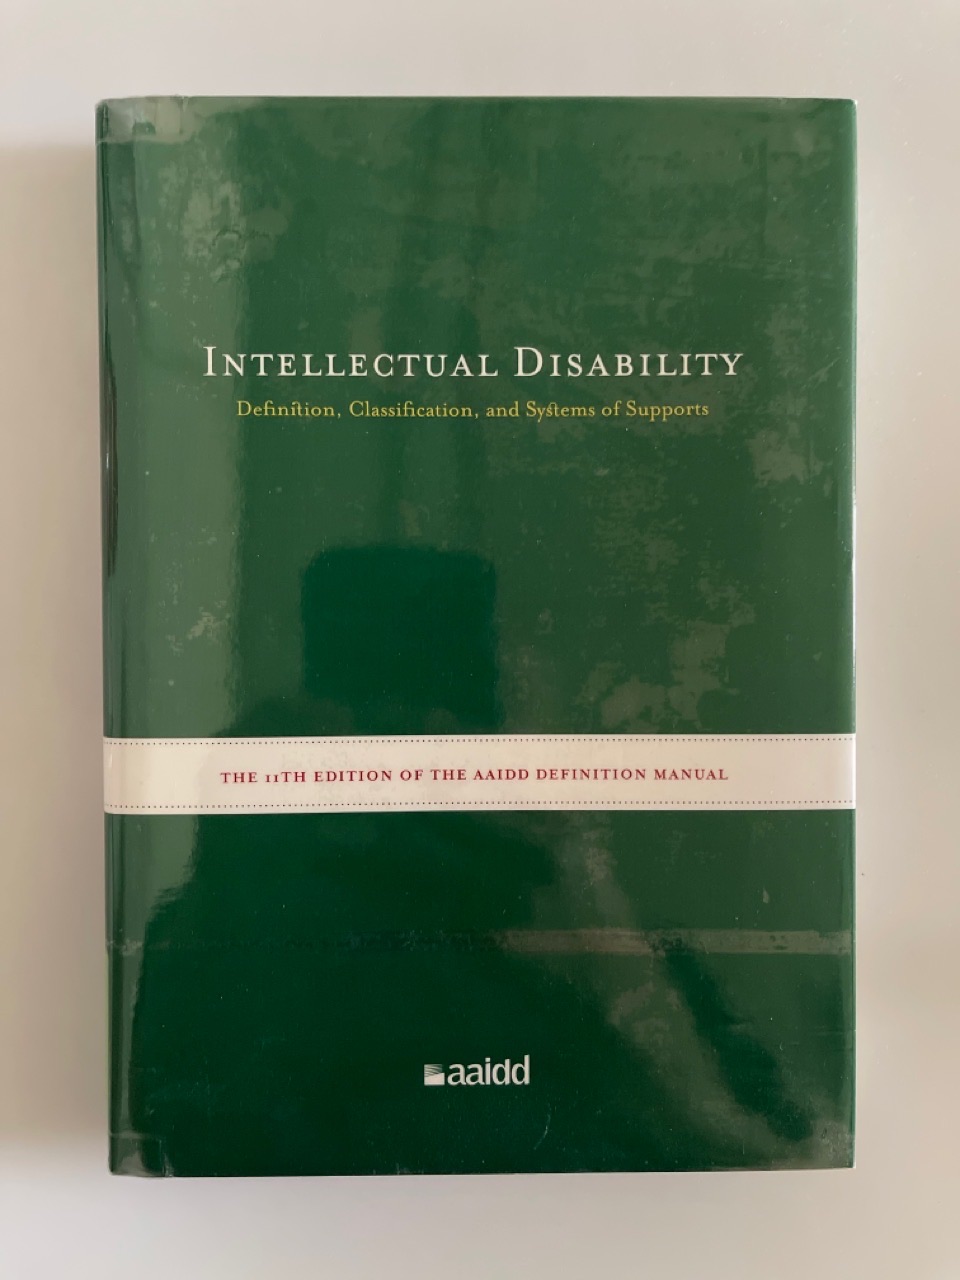 Intellectual Disability: Definition, Classification, and Systems of Supports. - Schalock, Robert L., Sharon A. Ph.d. Borthwick-duffy and Valerie J. Bradley